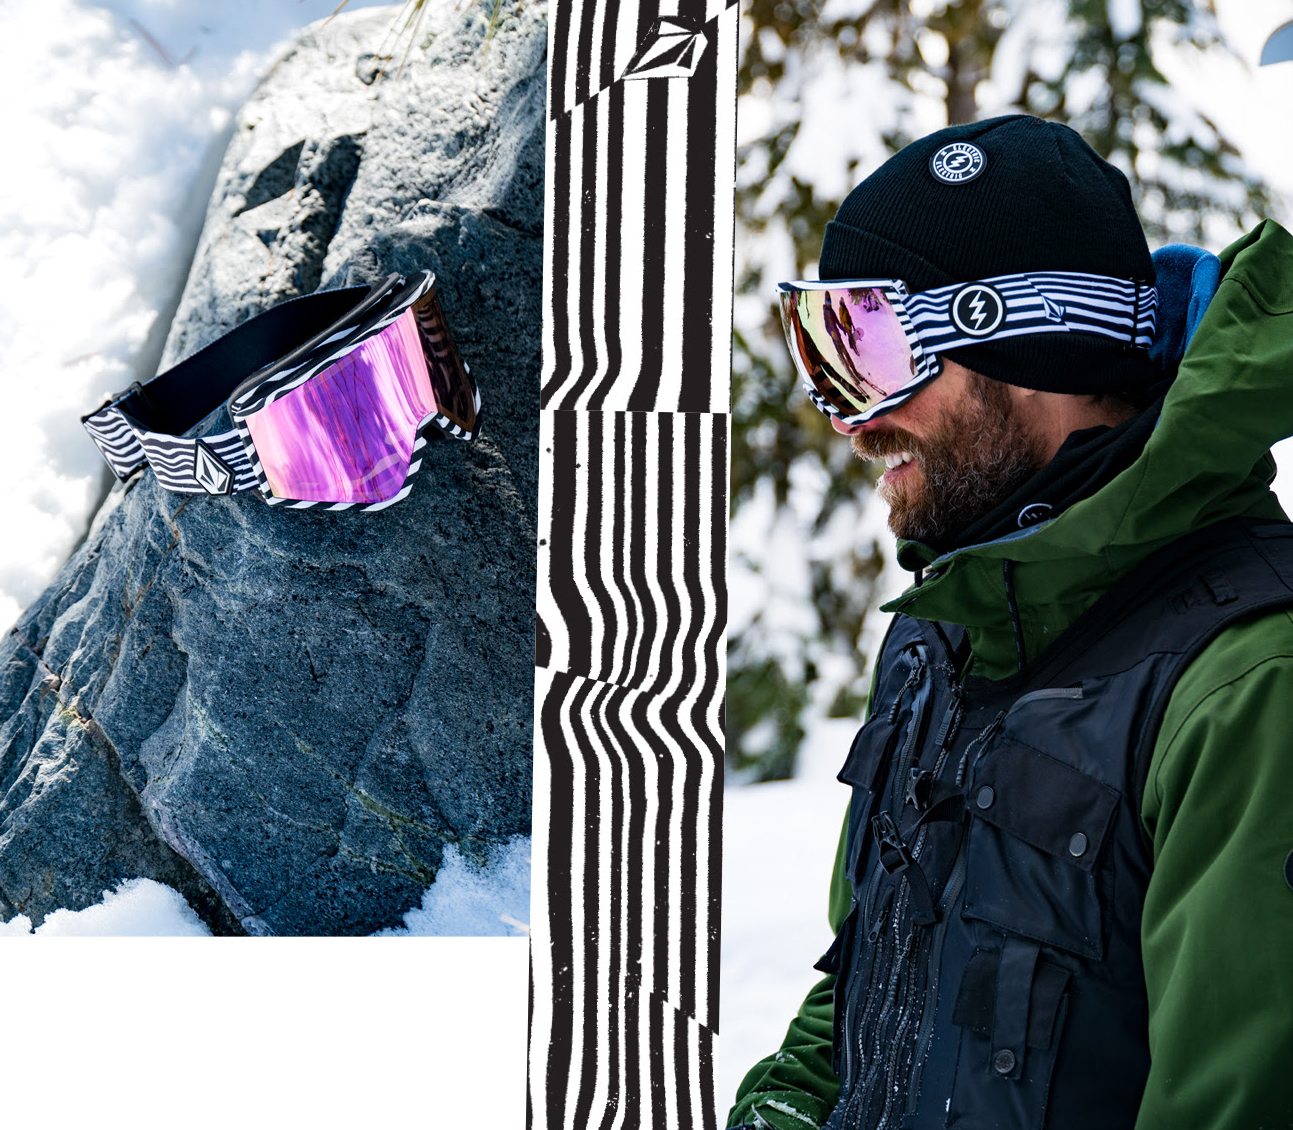 Electric x Volcom 2019 Goggles on Sale